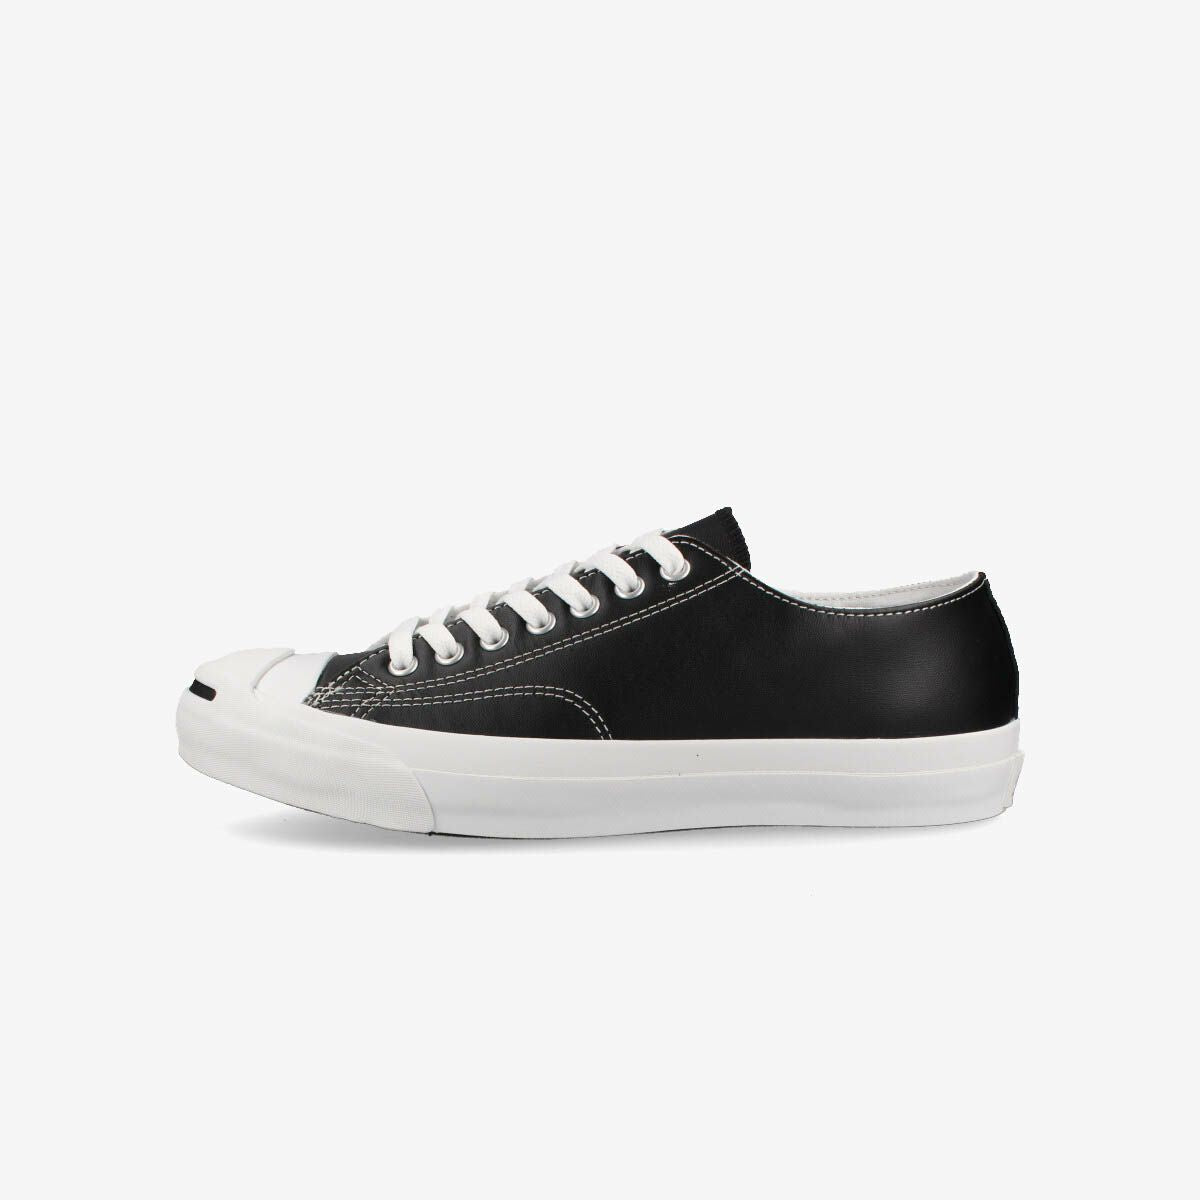 converse / jack purcell lea mid / 24.5cm